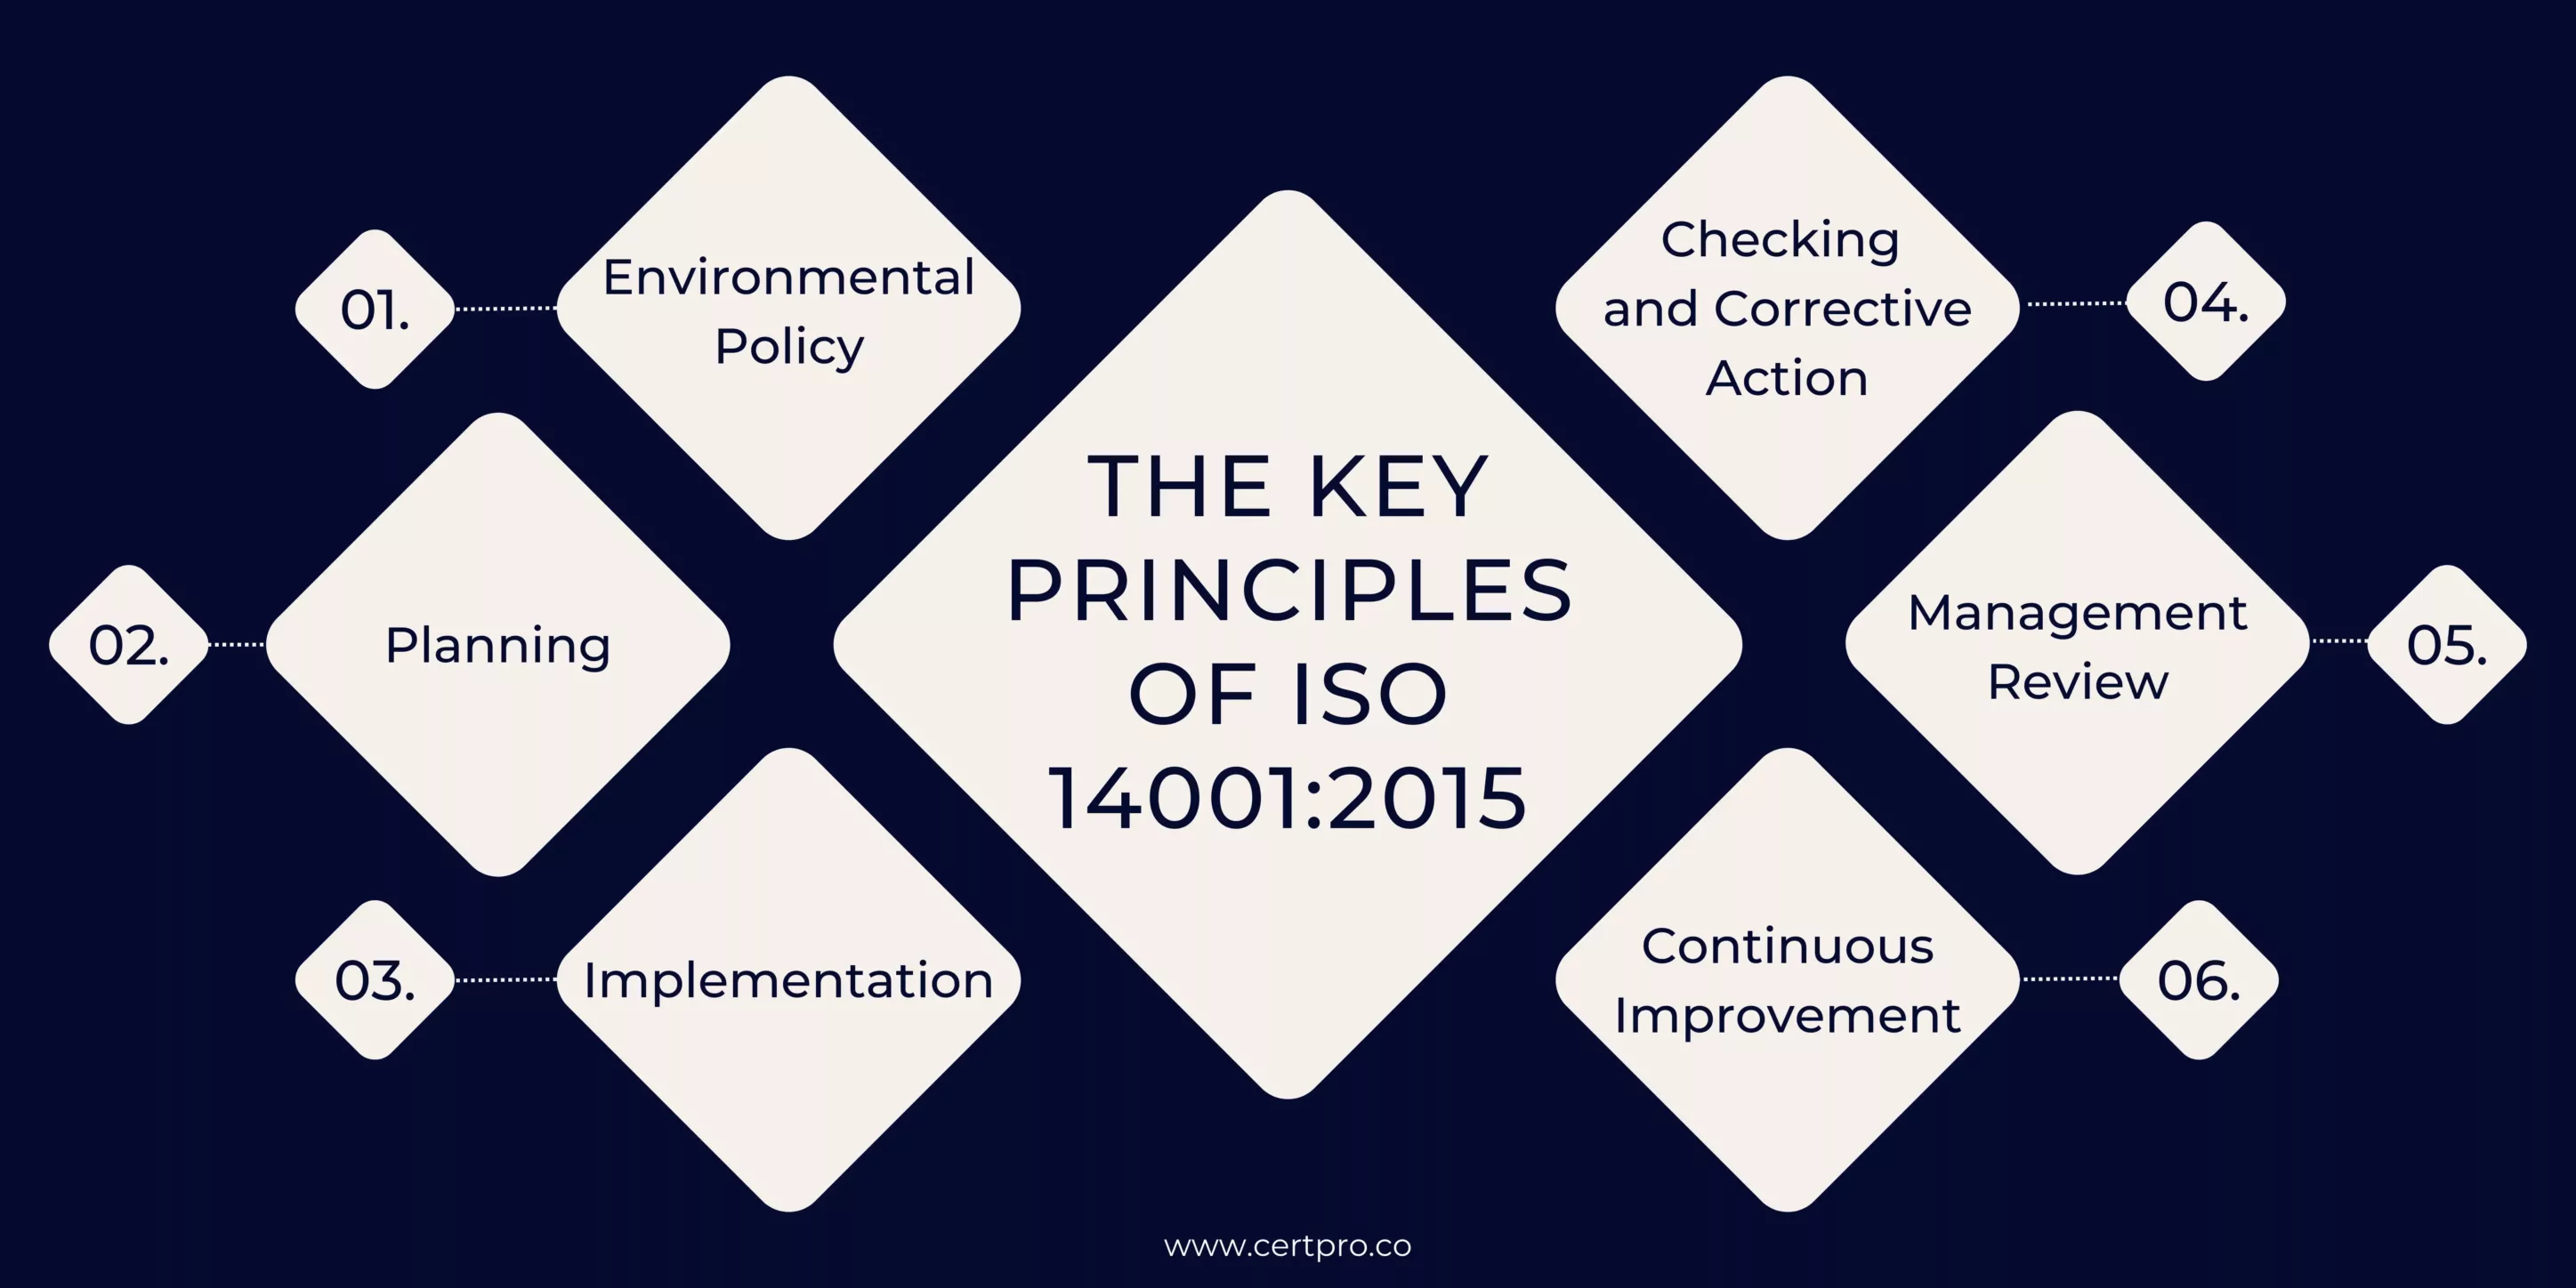 THE KEY PRINCIPLES OF ISO 14001 2015